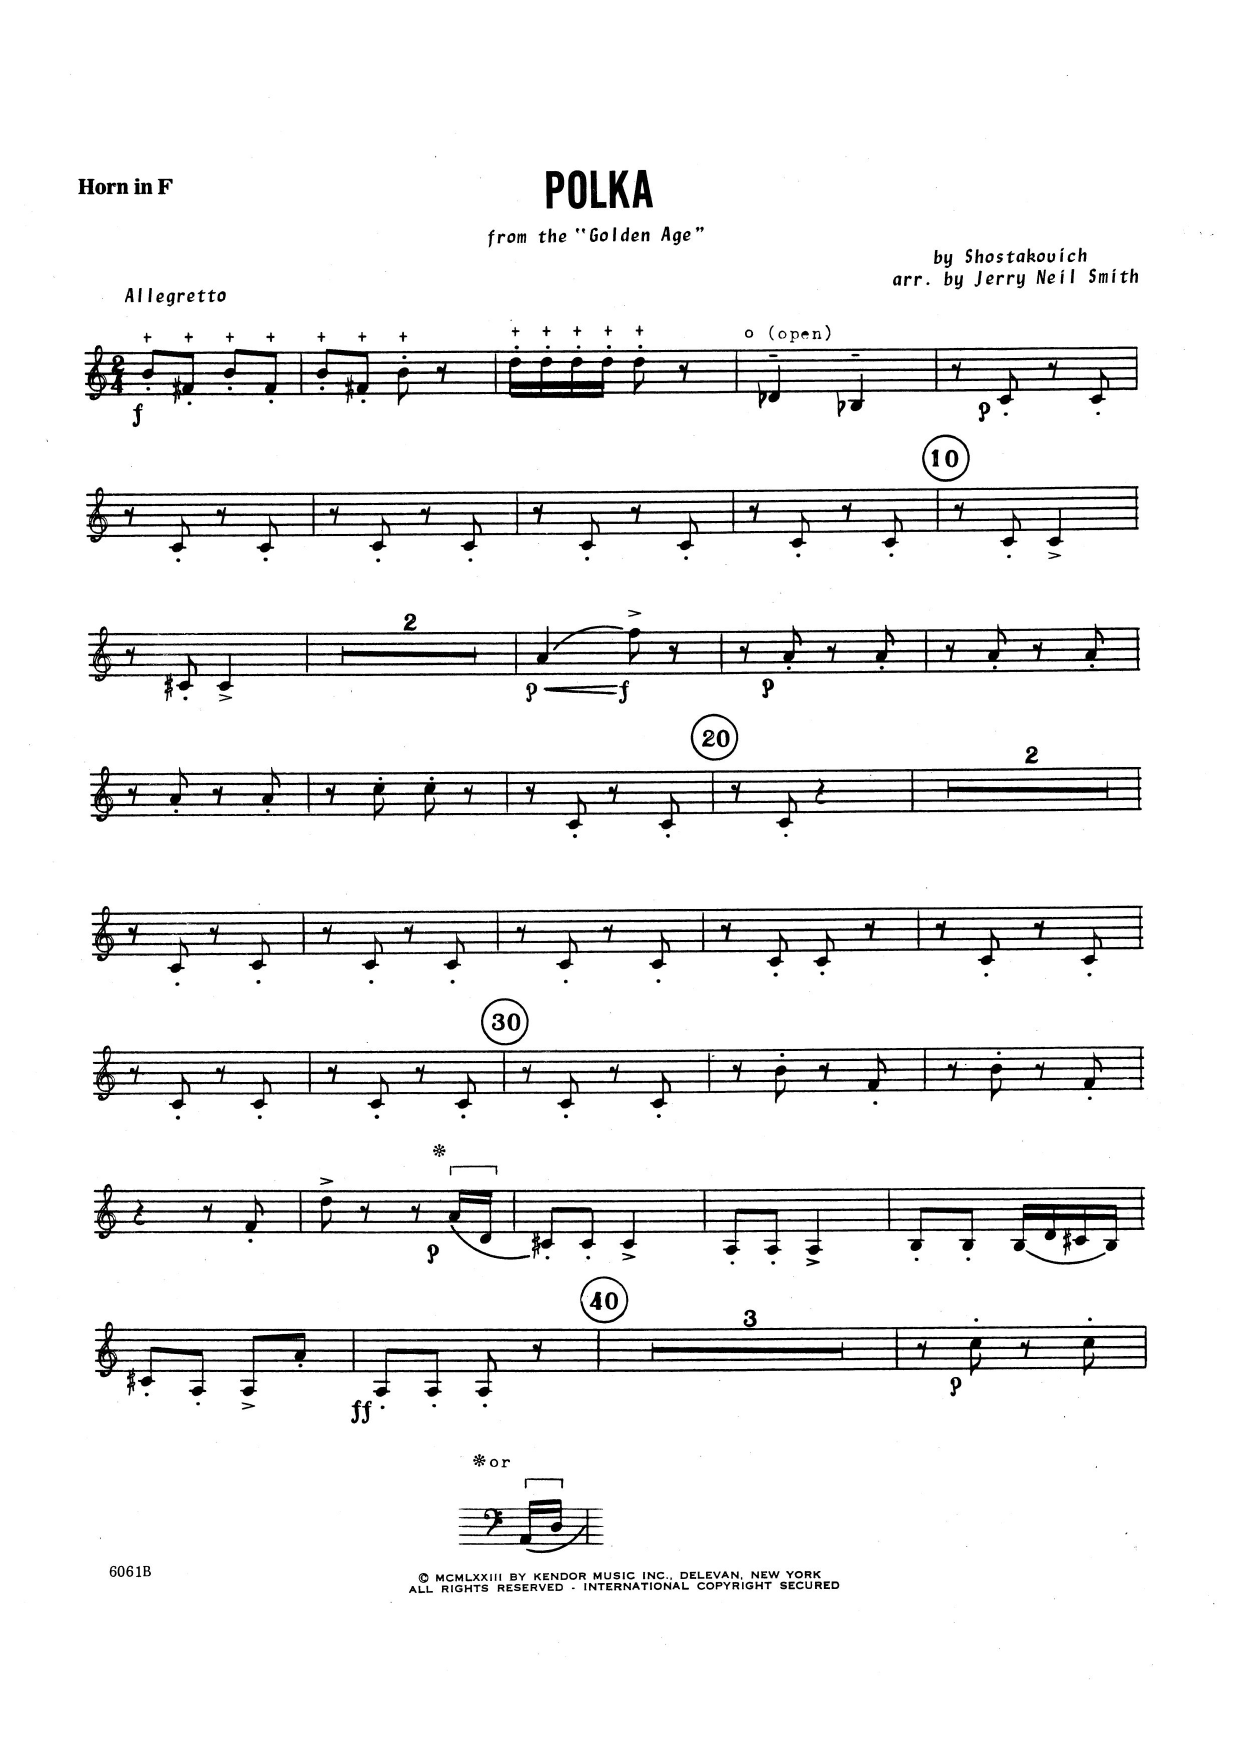 Download Jerry Smith Polka - Horn in F Sheet Music